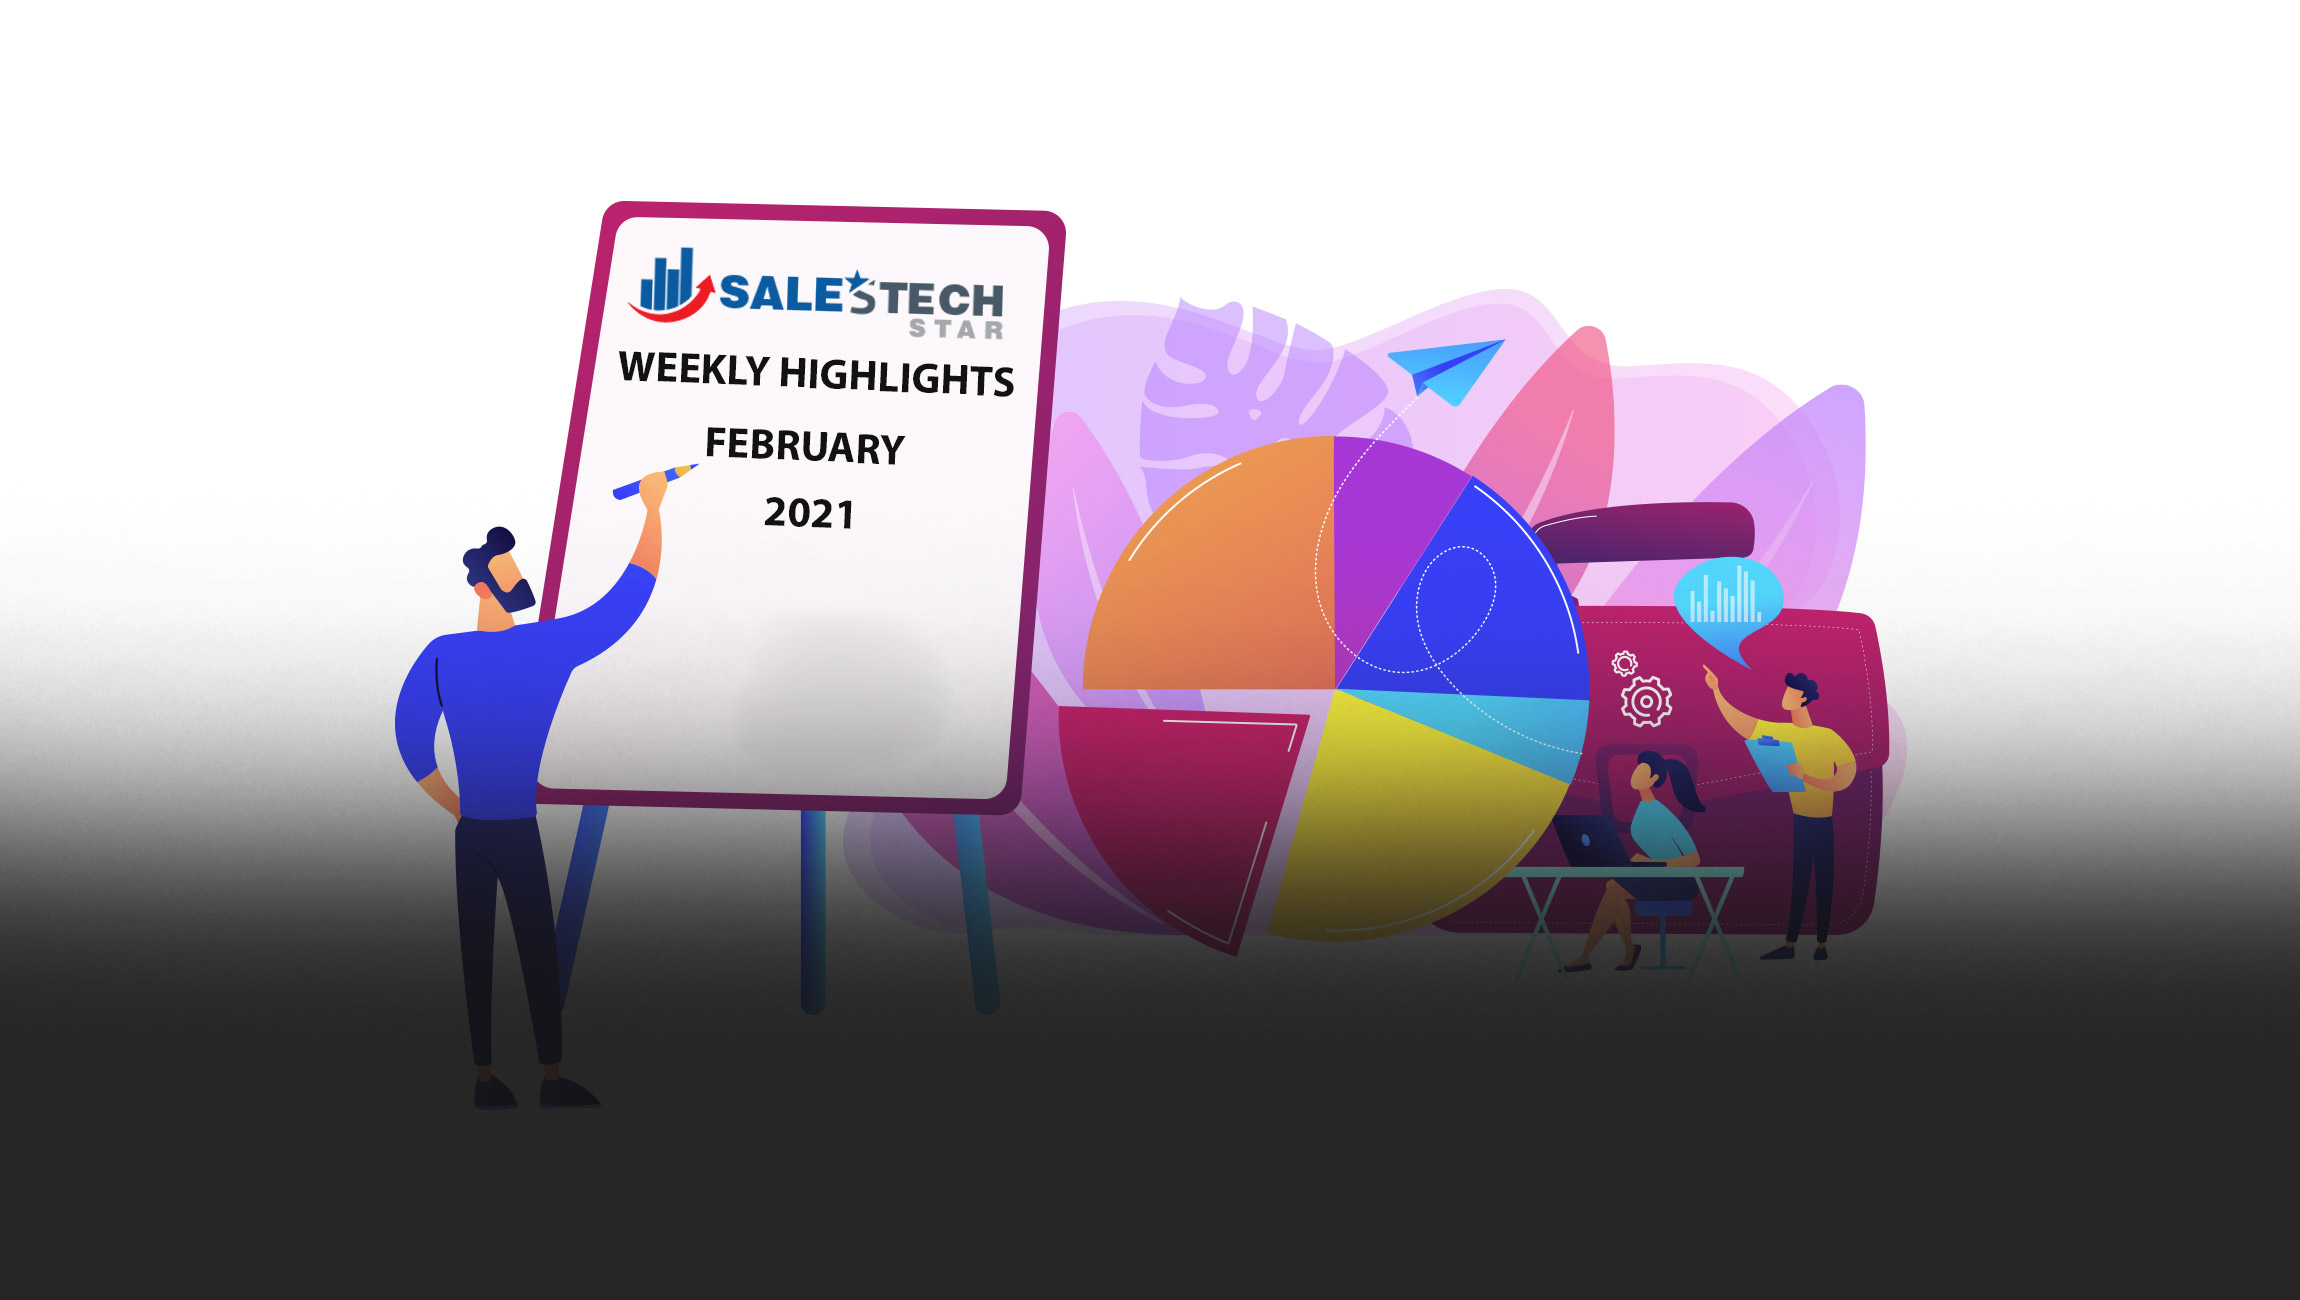 Sales Technology Highlights of The Week: 15-February-2021: Featuring Sisense, Alteryx, IBM, WPP and Hewlett Packard!